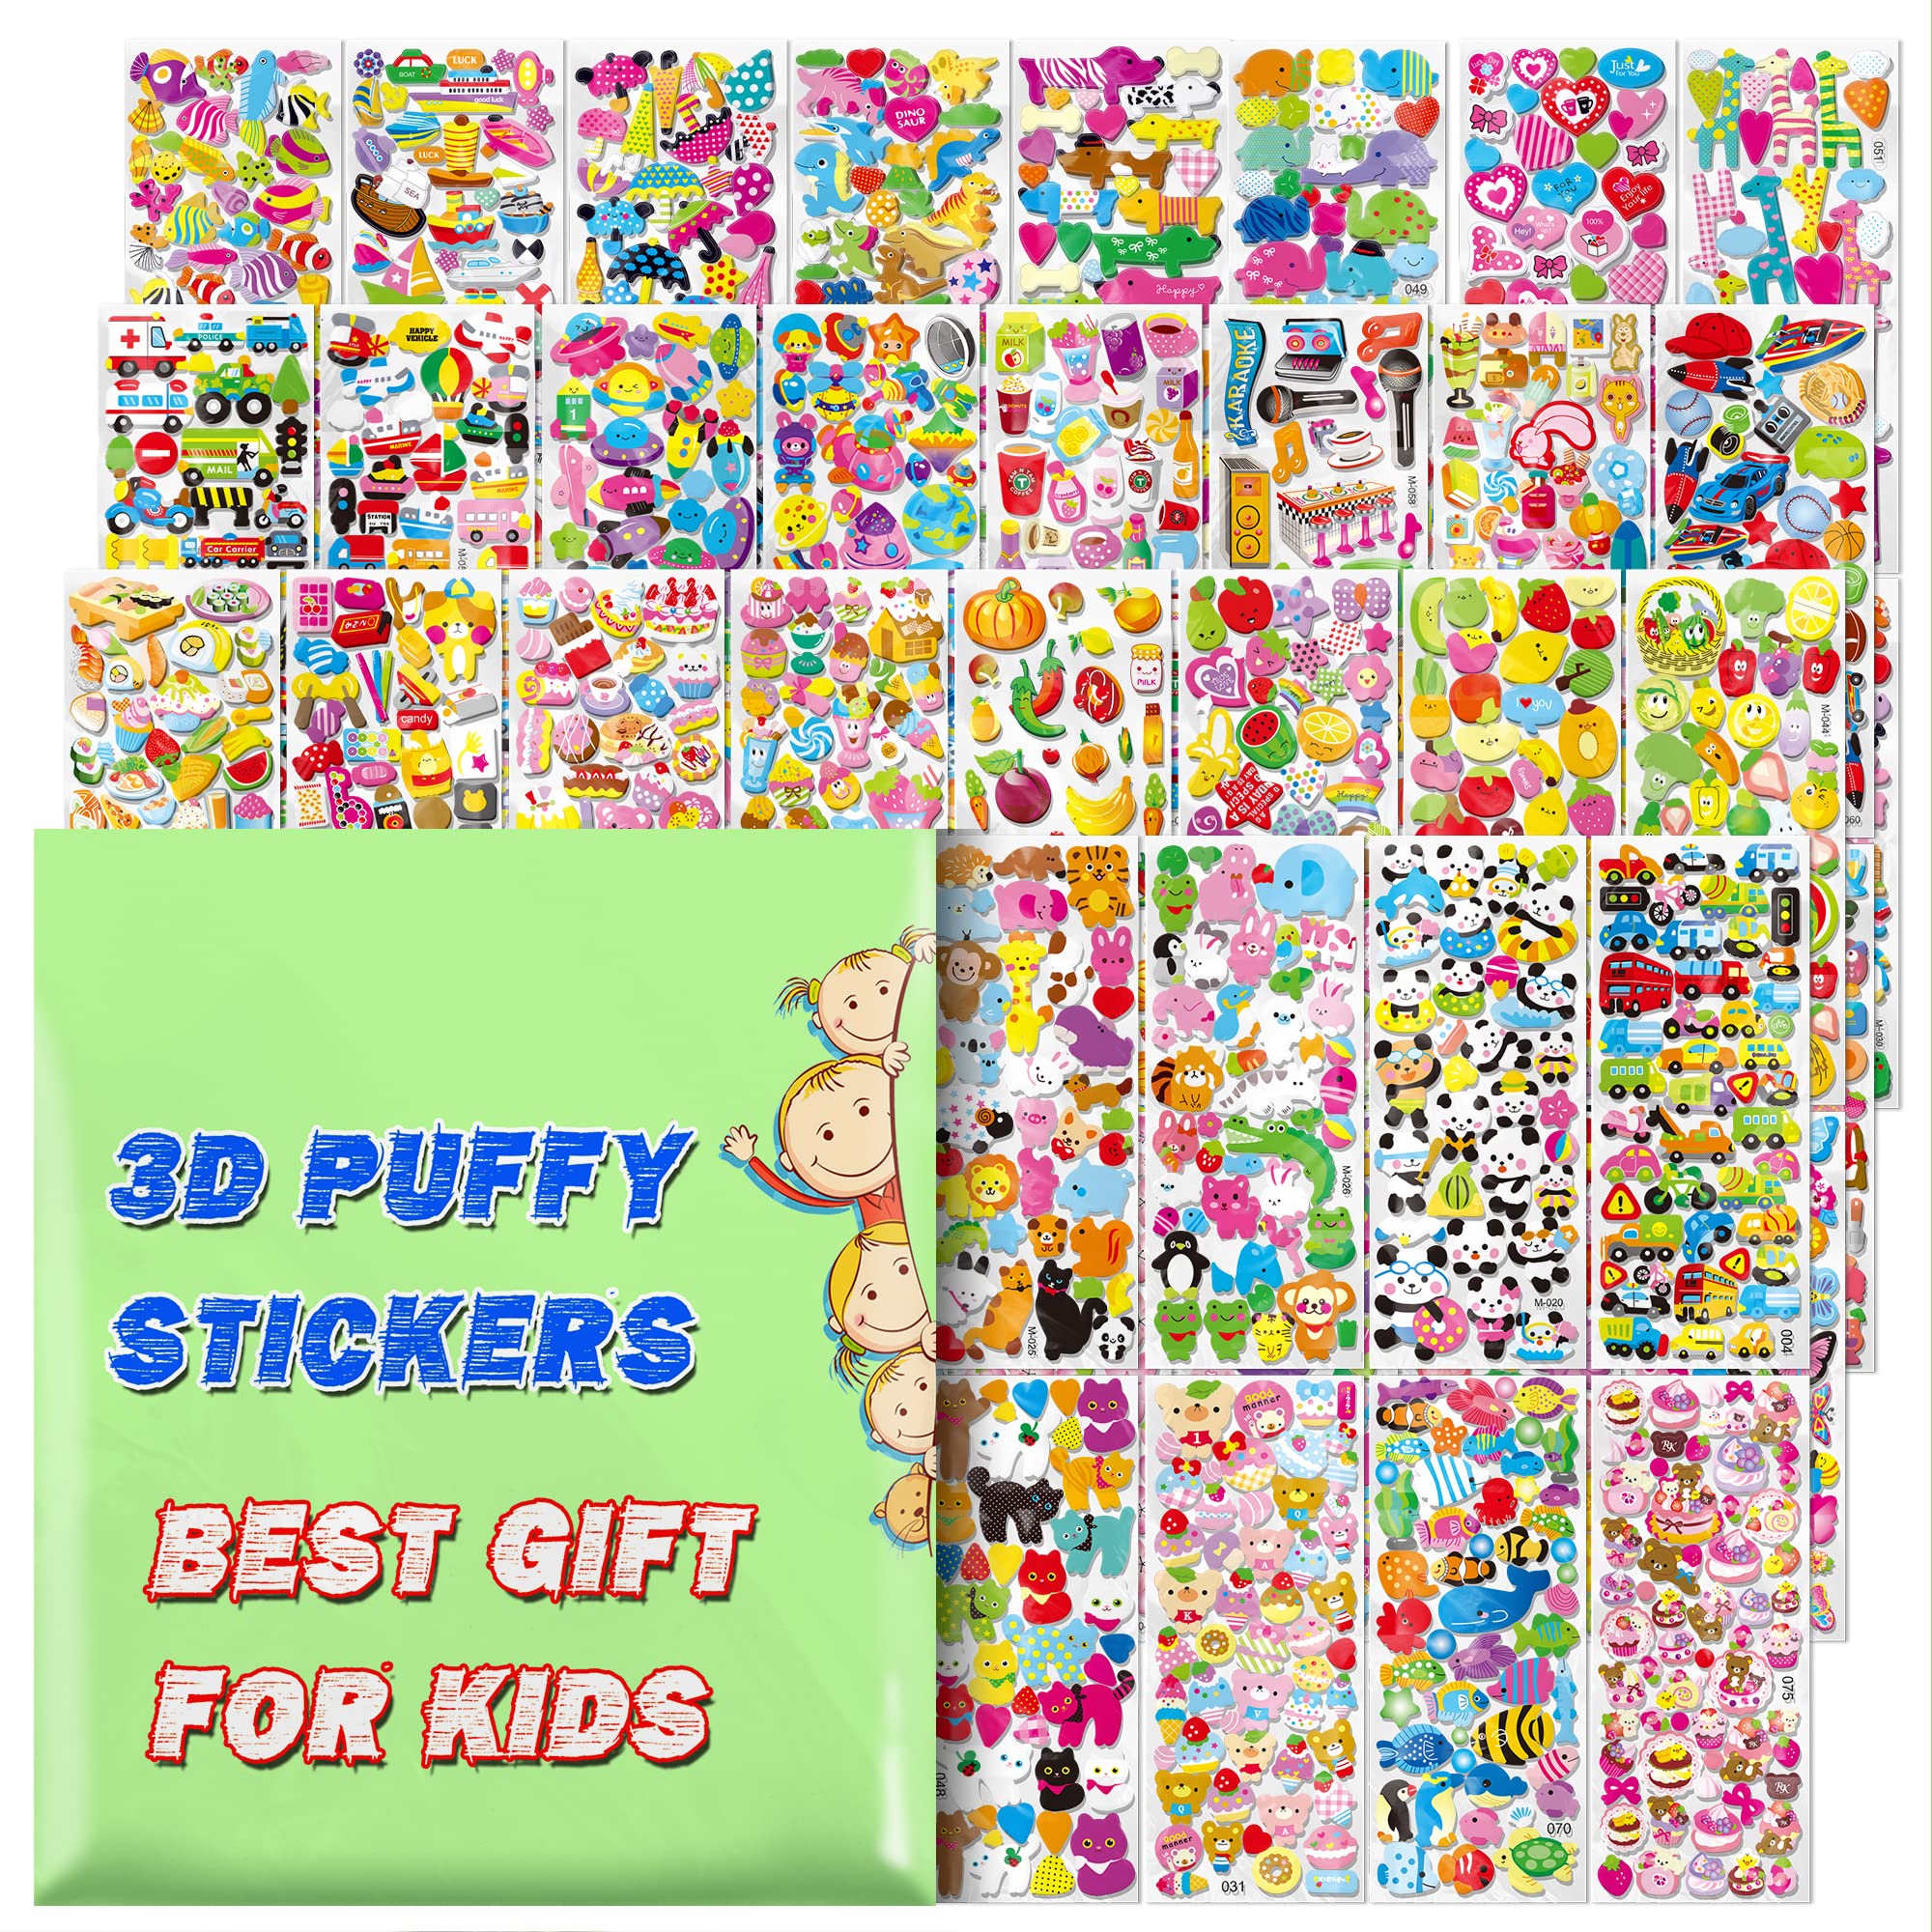 $7.99: Stickers for Kids, 3D Puffy Stickers, 64 Different Sheets, 3200+ Stickers (Prime Members)